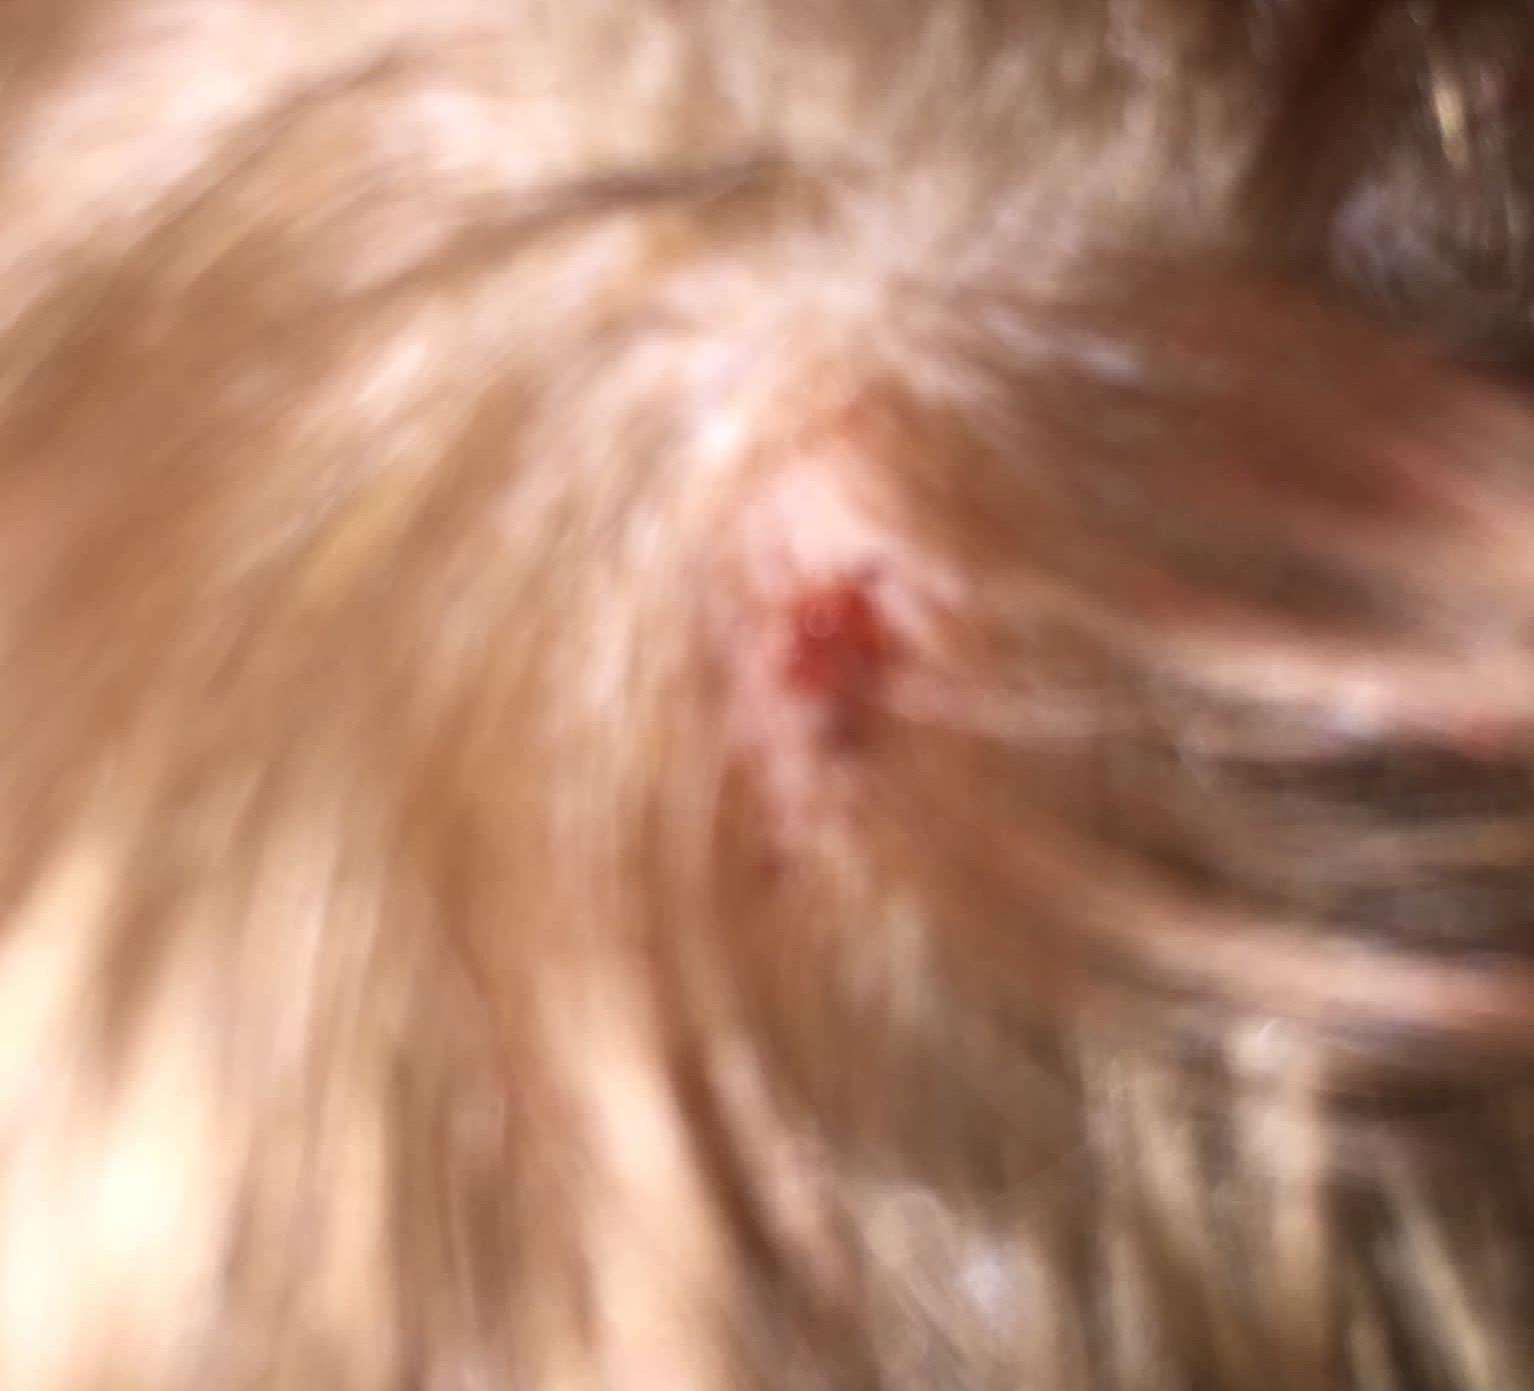 An 11-year-old was left bleeding after a rock was thrown at his head at a bus stop. Picture: Debbie-ann Griffiths